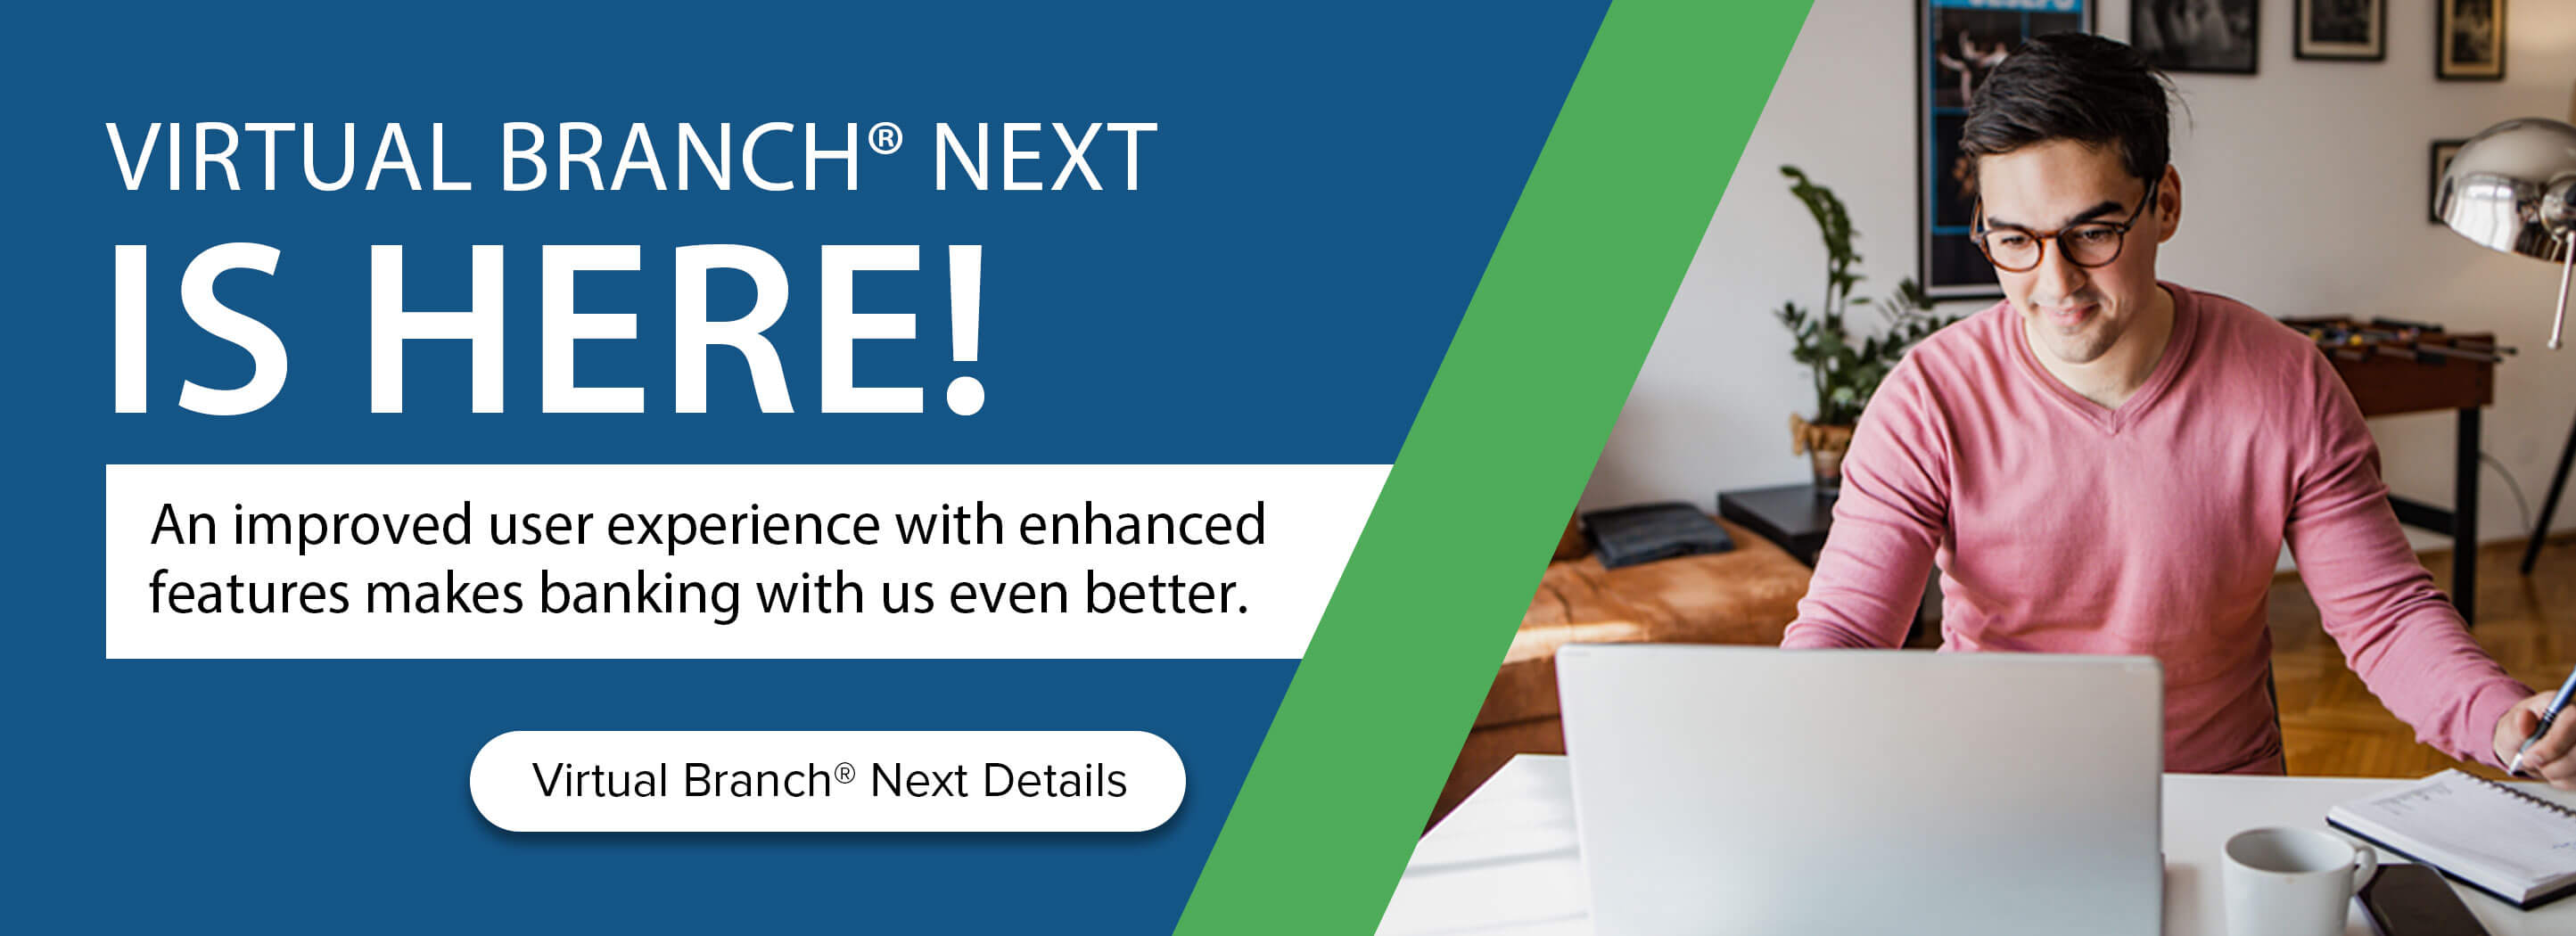 Virtual Branch Next is here! An improved user experience with enhanced features makes banking with us even better. Virtual Branch Next details